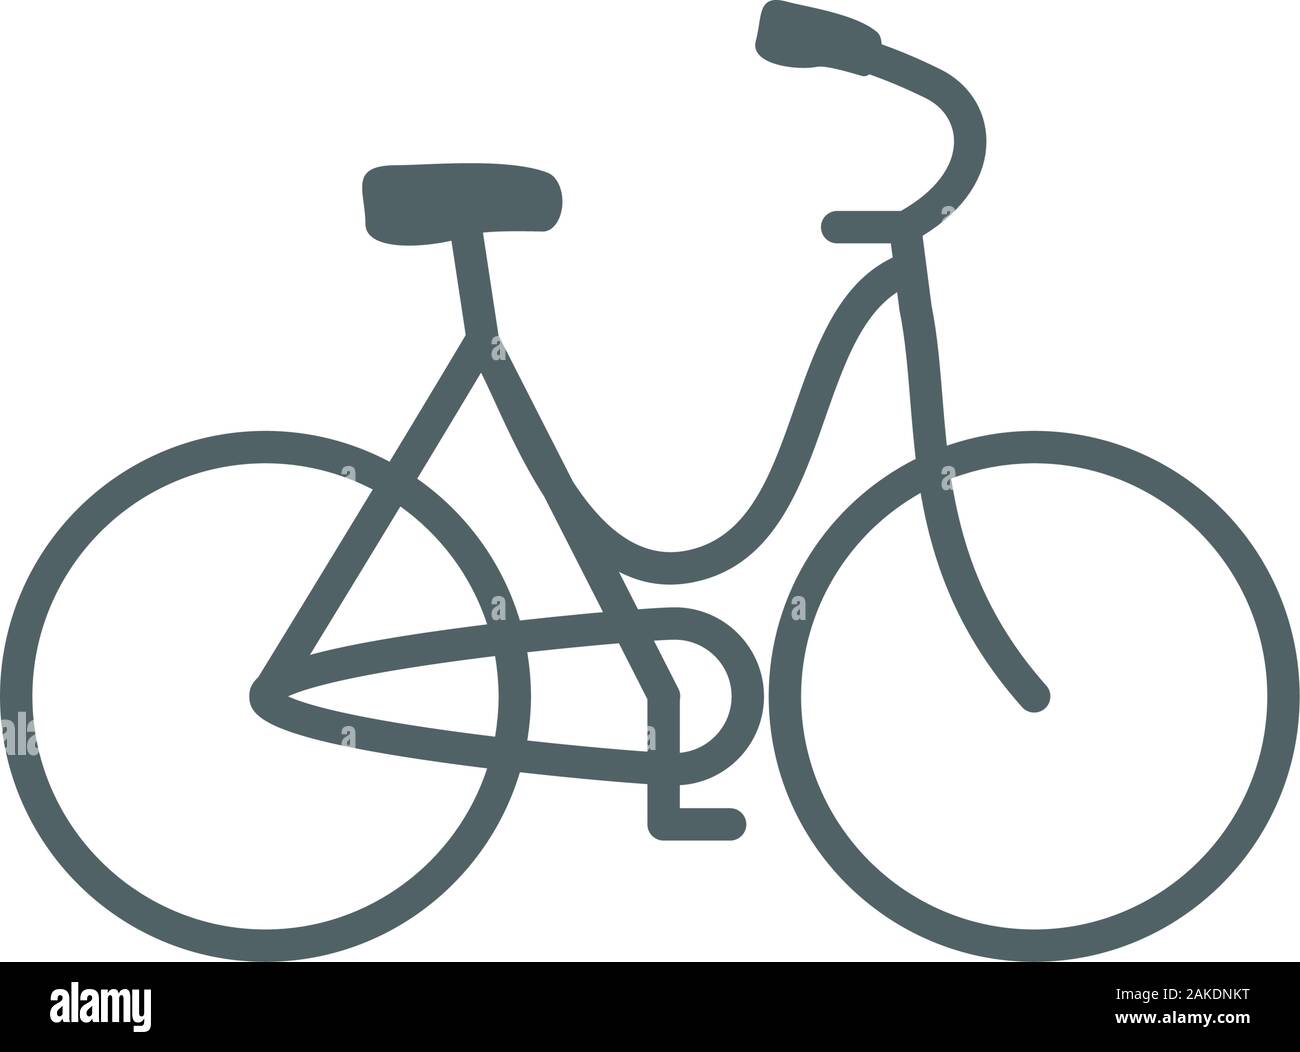 bike icon design, Vehicle bicycle cycle healthy lifestyle sport and leisure theme Vector illustration Stock Vector